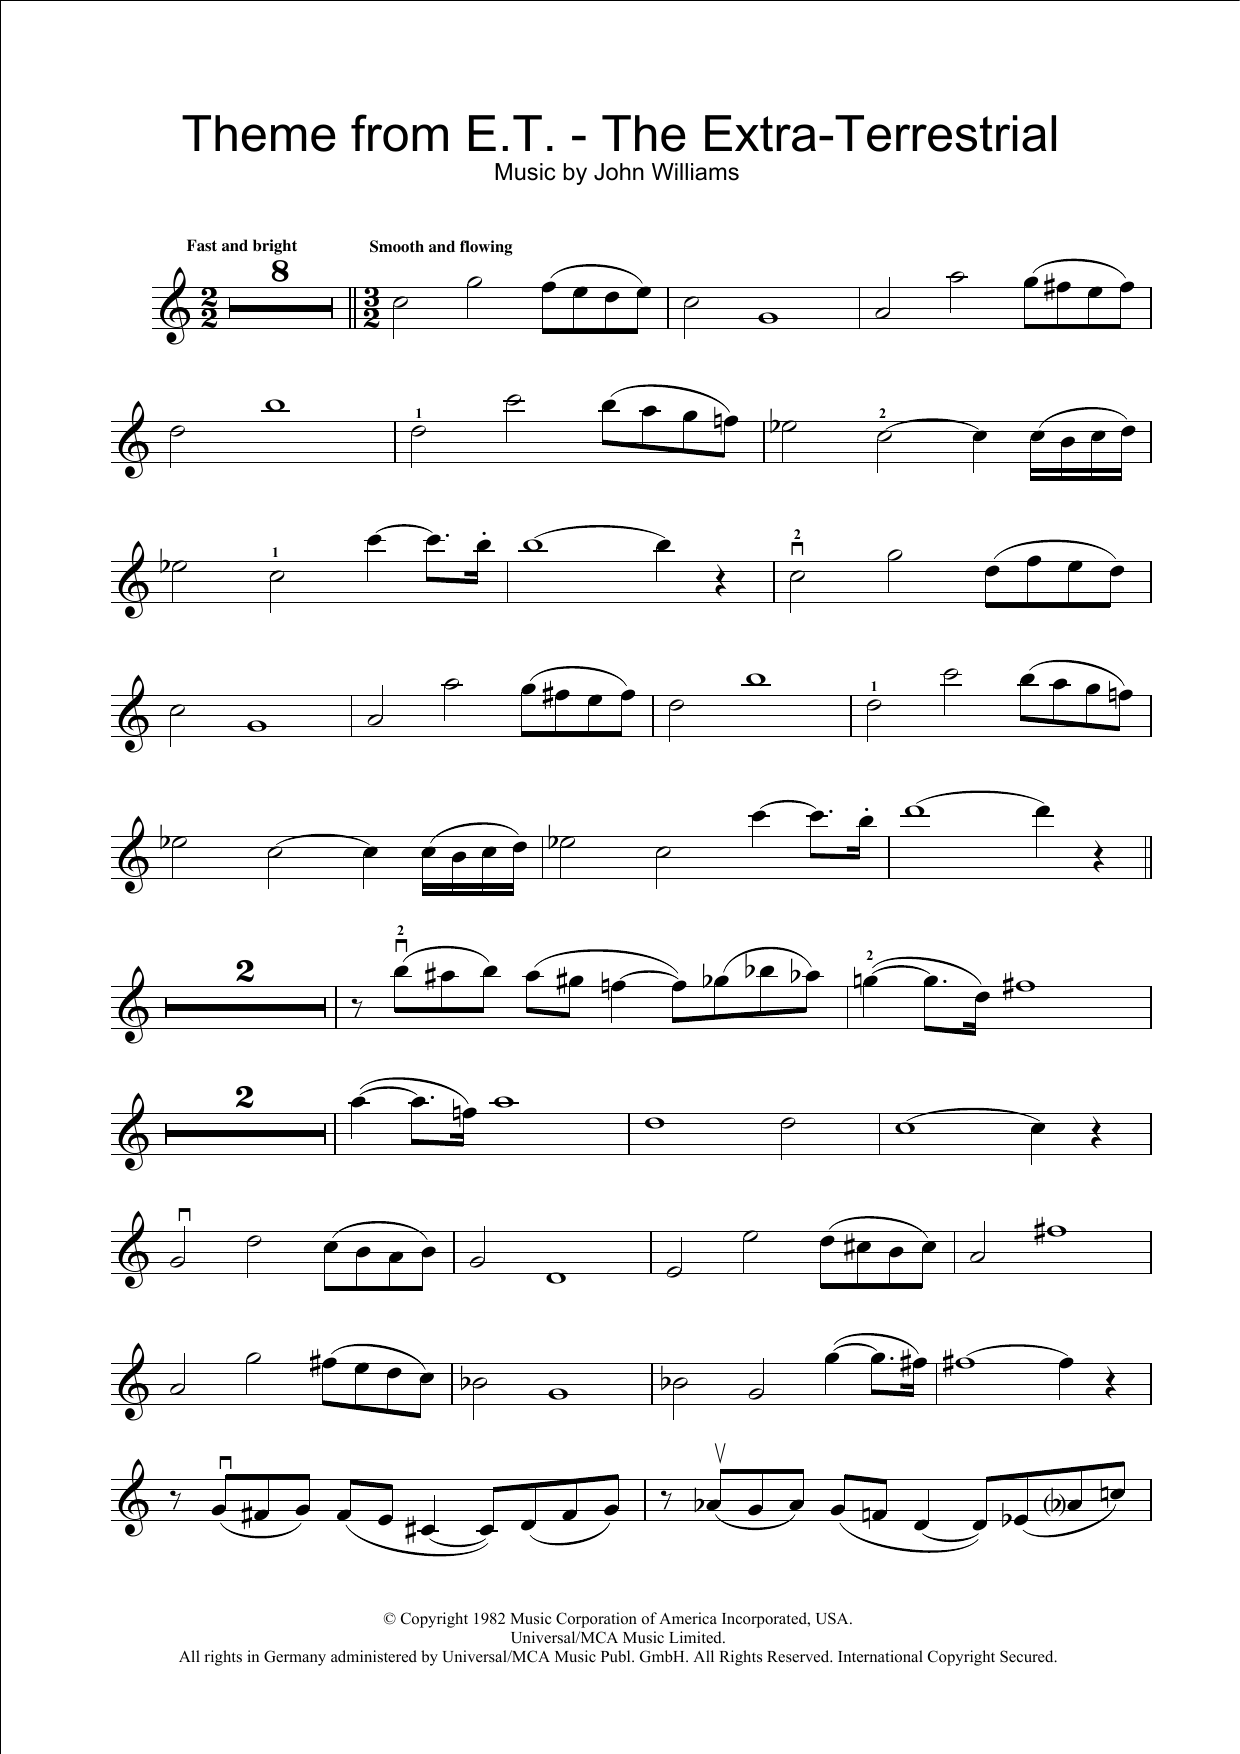 Download John Williams Theme from E.T. - The Extra-Terrestrial Sheet Music